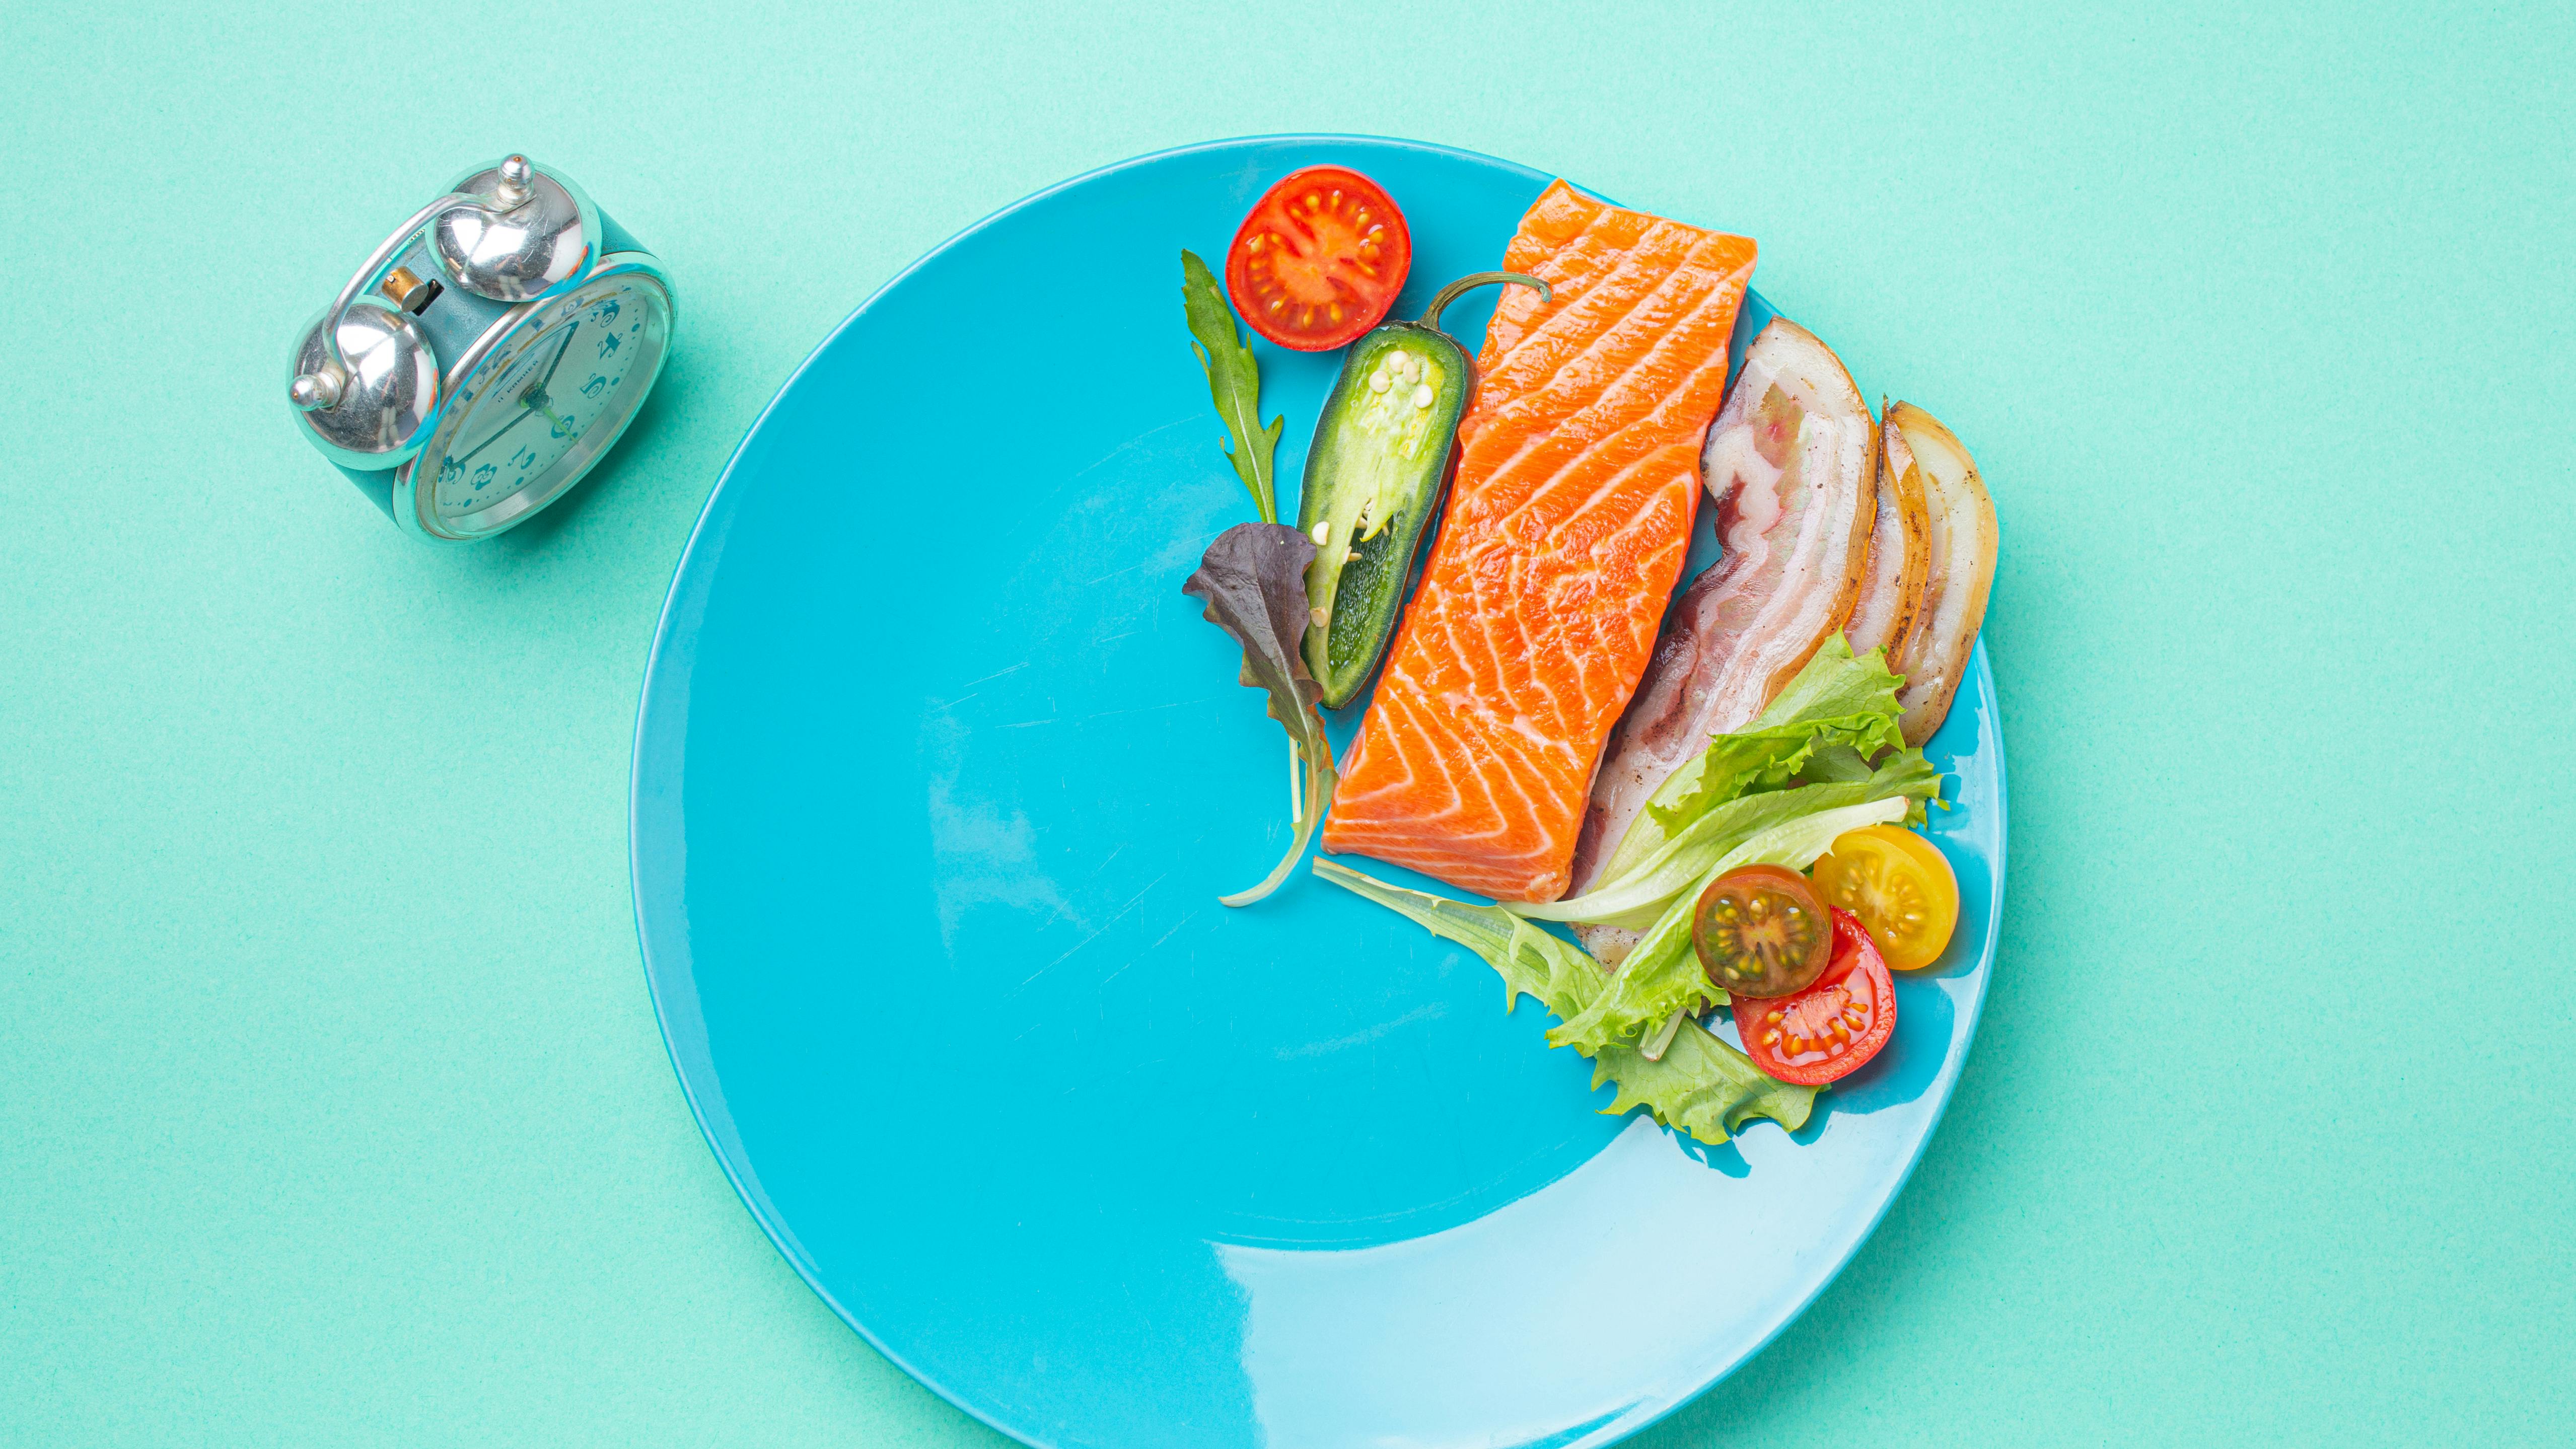 Intermittent fasting low carb hight fats diet concept flat lay, healthy food salmon fish, bacon meat, vegetables and salad on blue plate and clock alarm on blue background top view